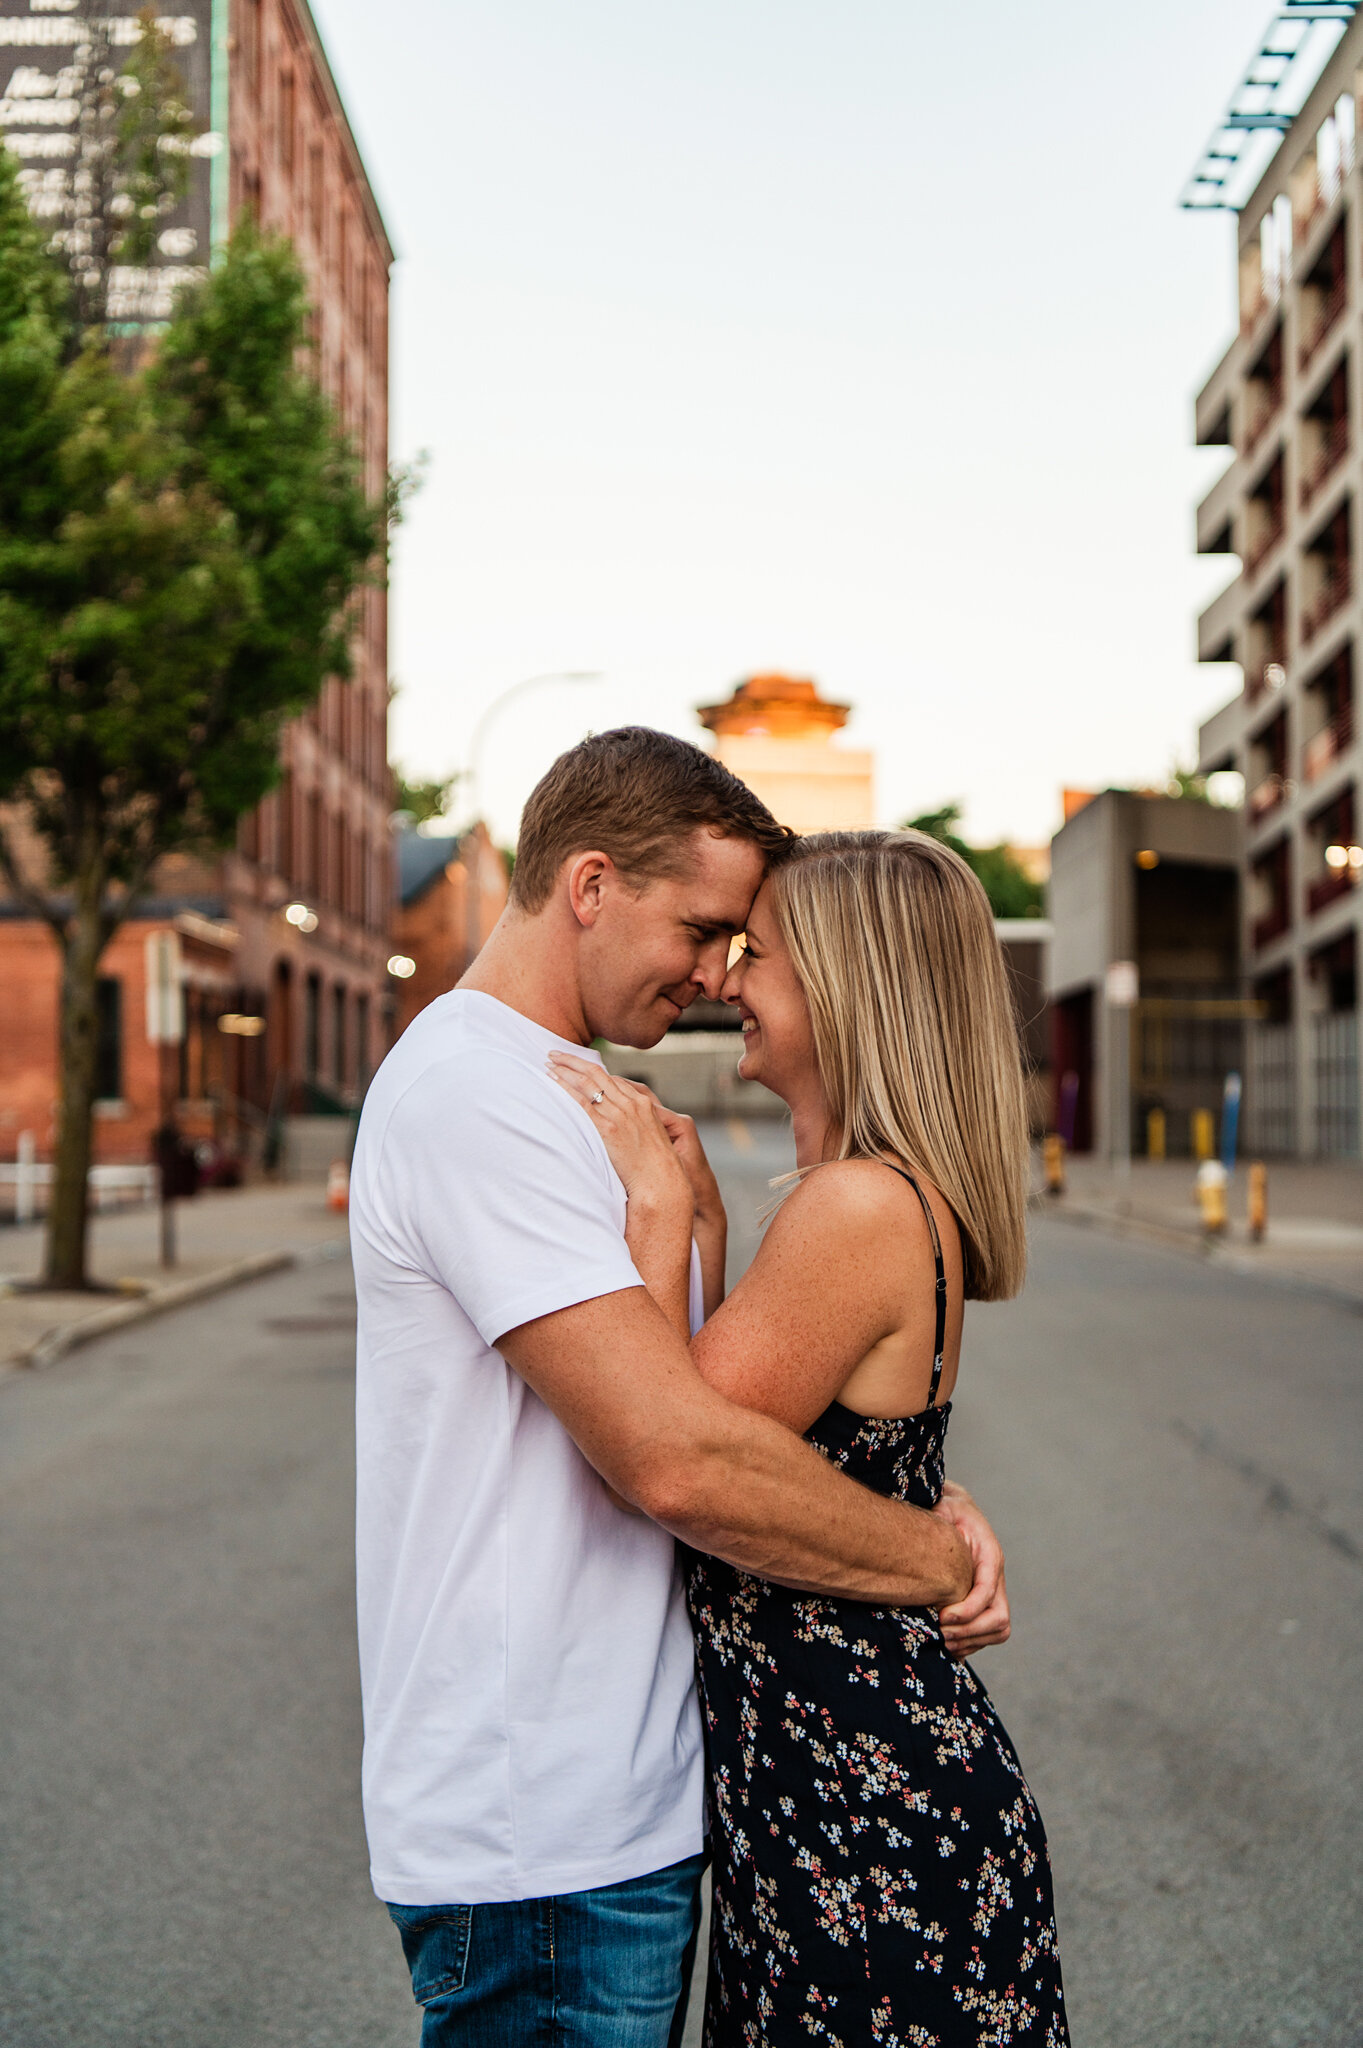 Genesee_Brew_House_High_Falls_Rochester_Engagement_Session_JILL_STUDIO_Rochester_NY_Photographer_5872.jpg